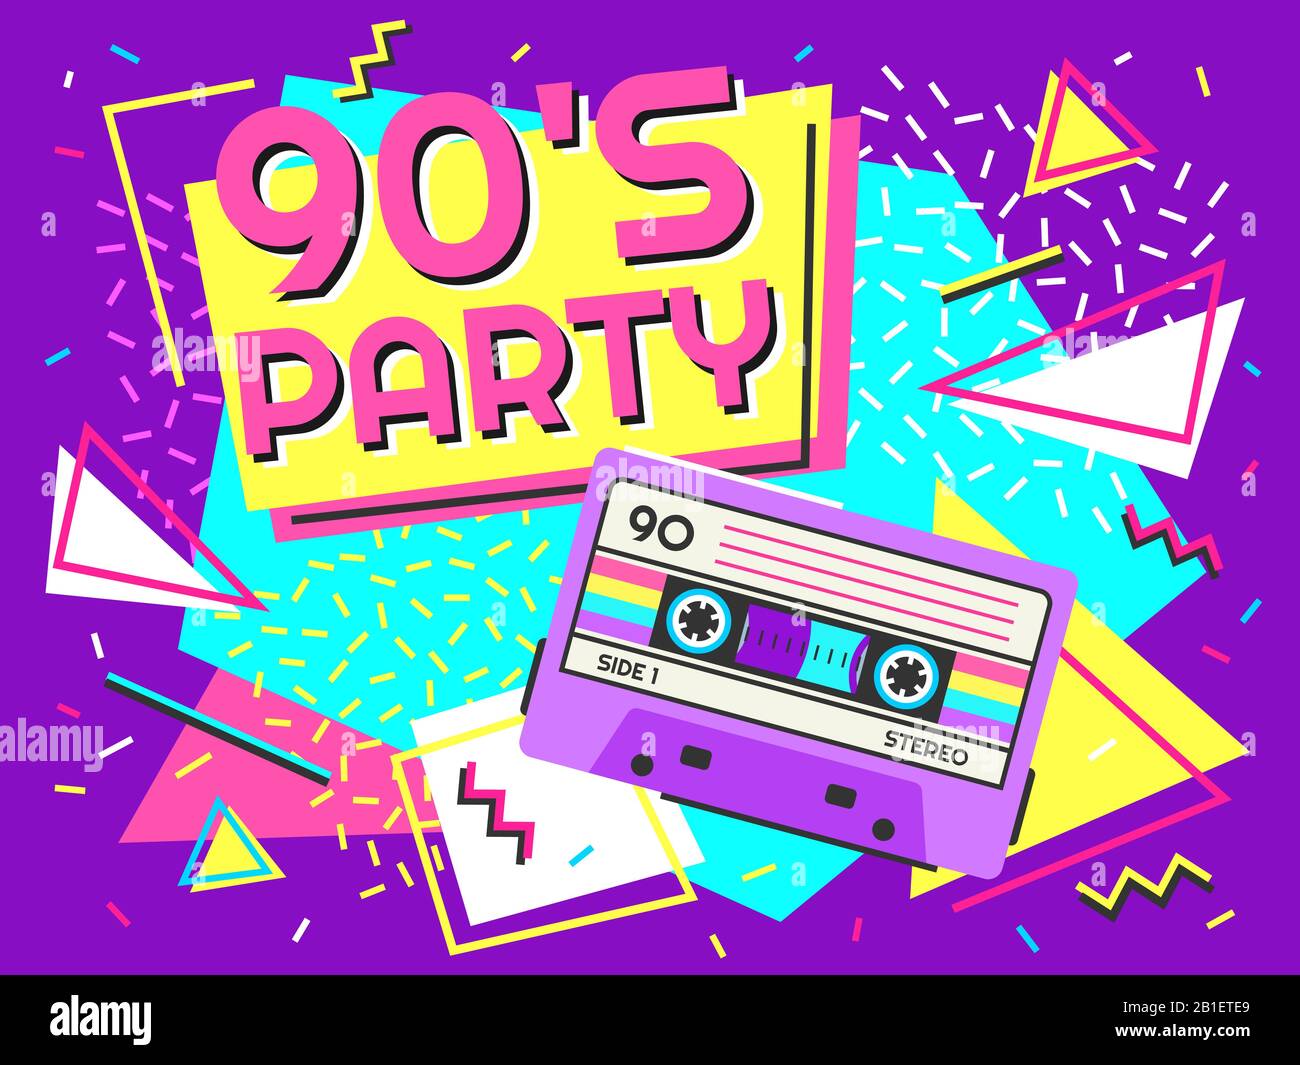 Retro party poster. Nineties music, vintage tape cassette banner and 90s style vector background illustration Stock Vector